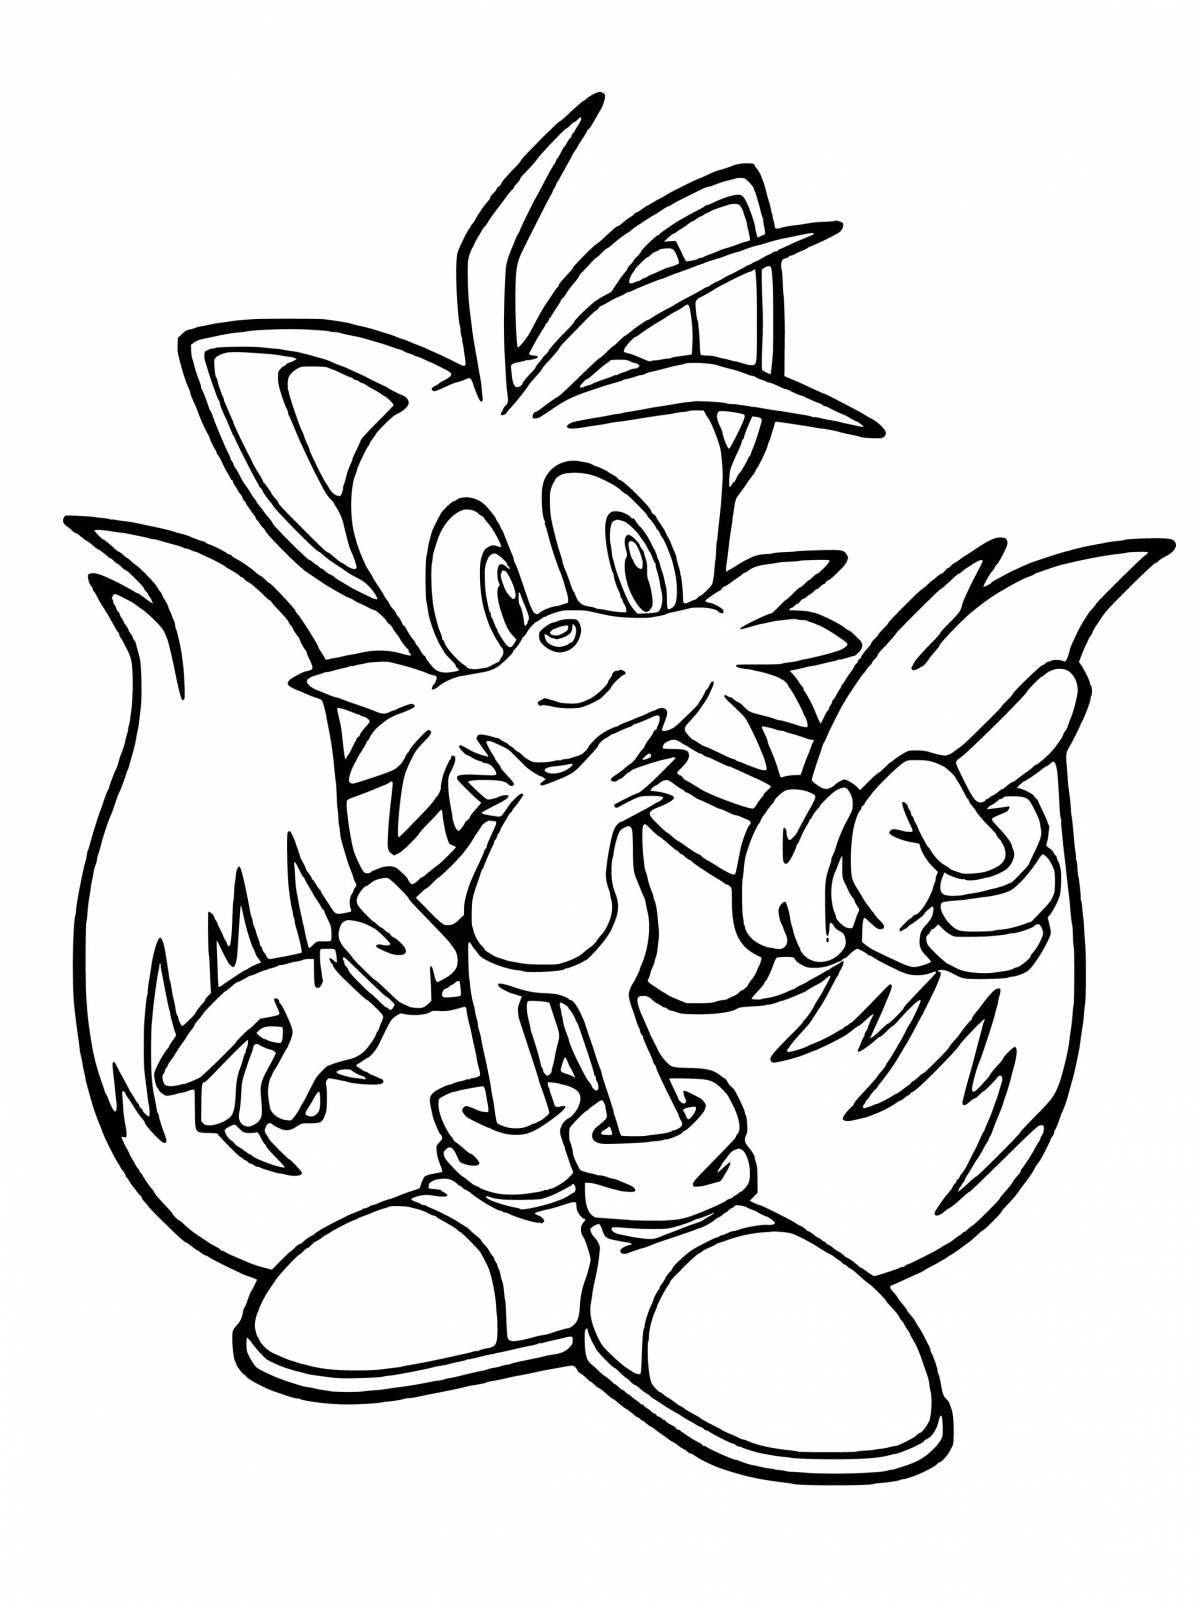 Super hedgehog sonic dynamic coloring page